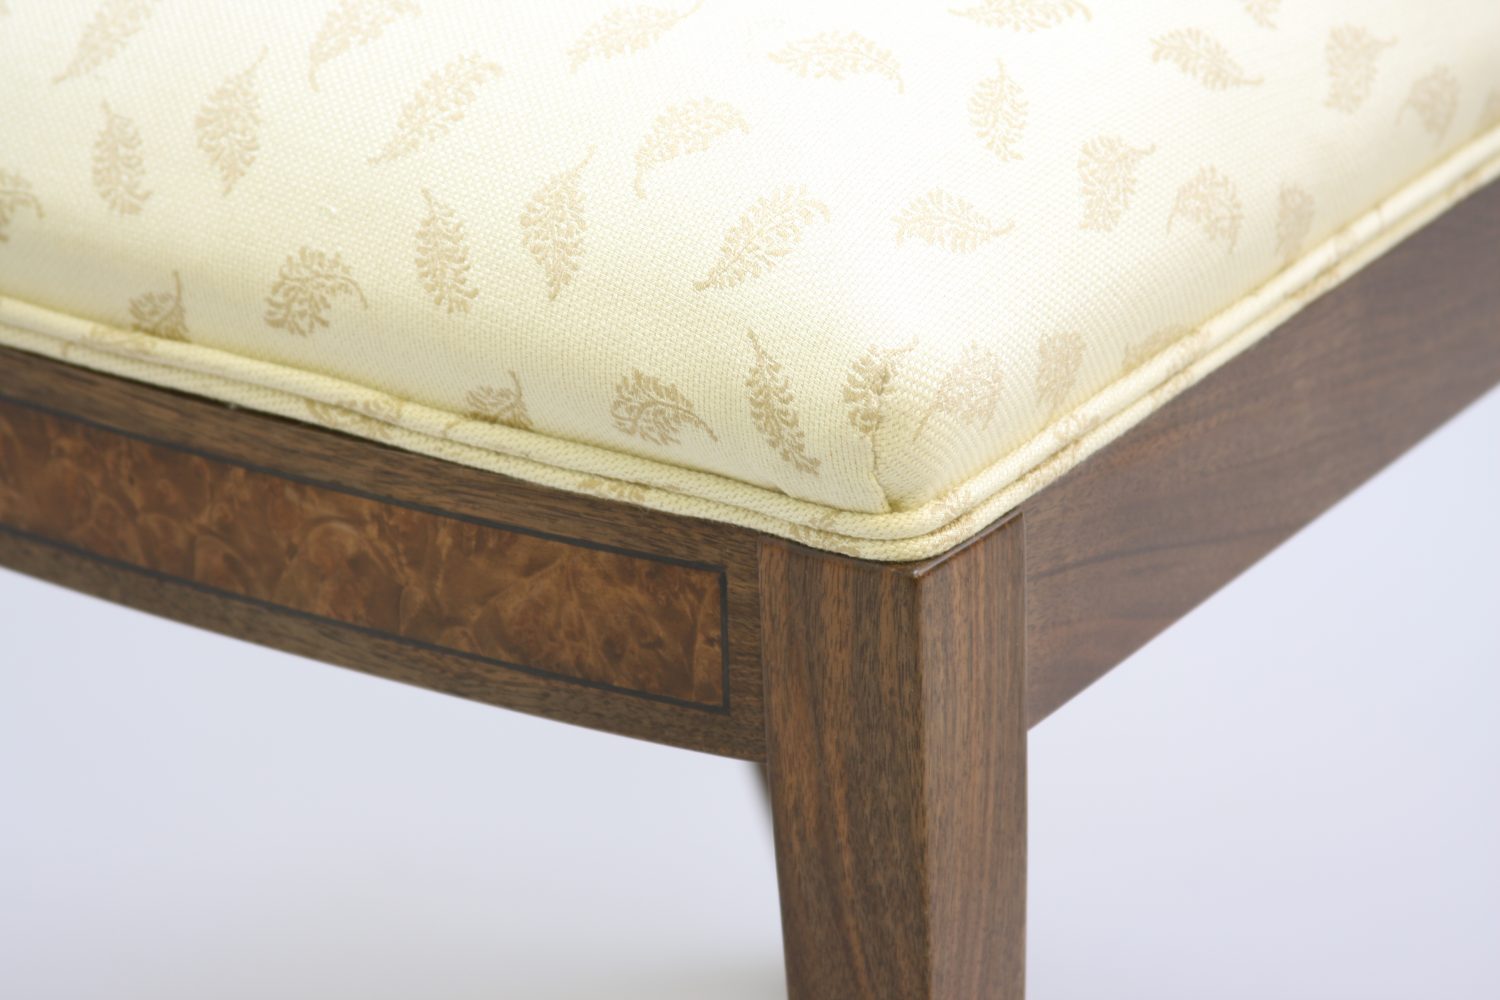 Matching detail on front rail with Traditional sprung upholstry 